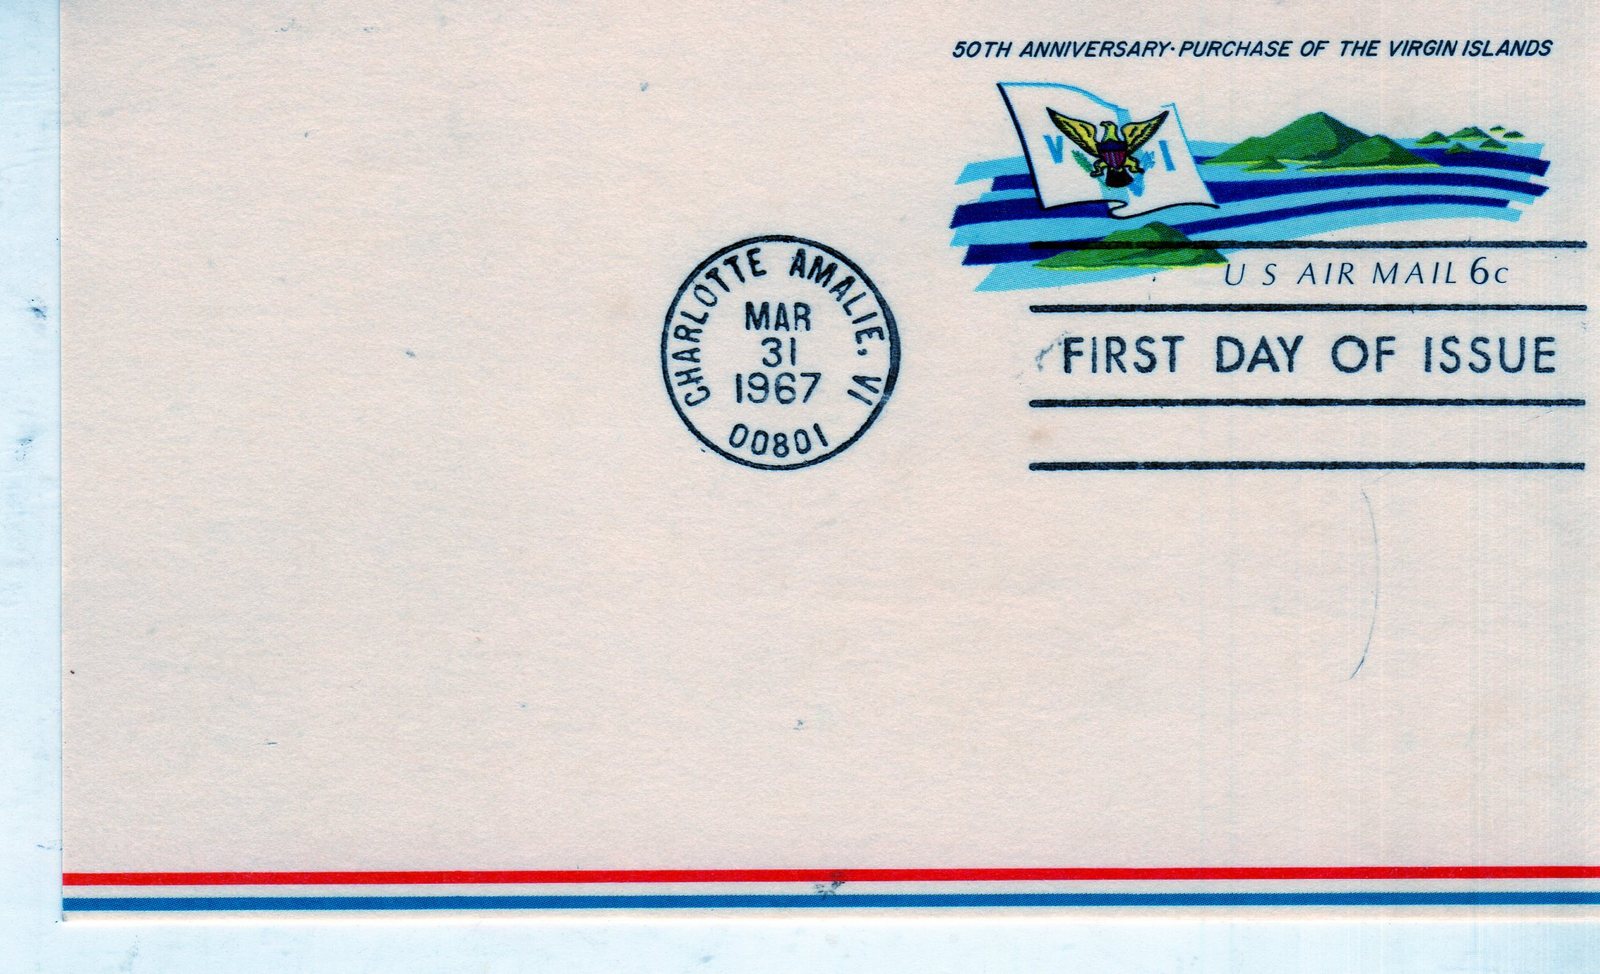 First Day of Issue -50th Anniversary US Virgin Islands Post Card 3/31/67 - $5.00